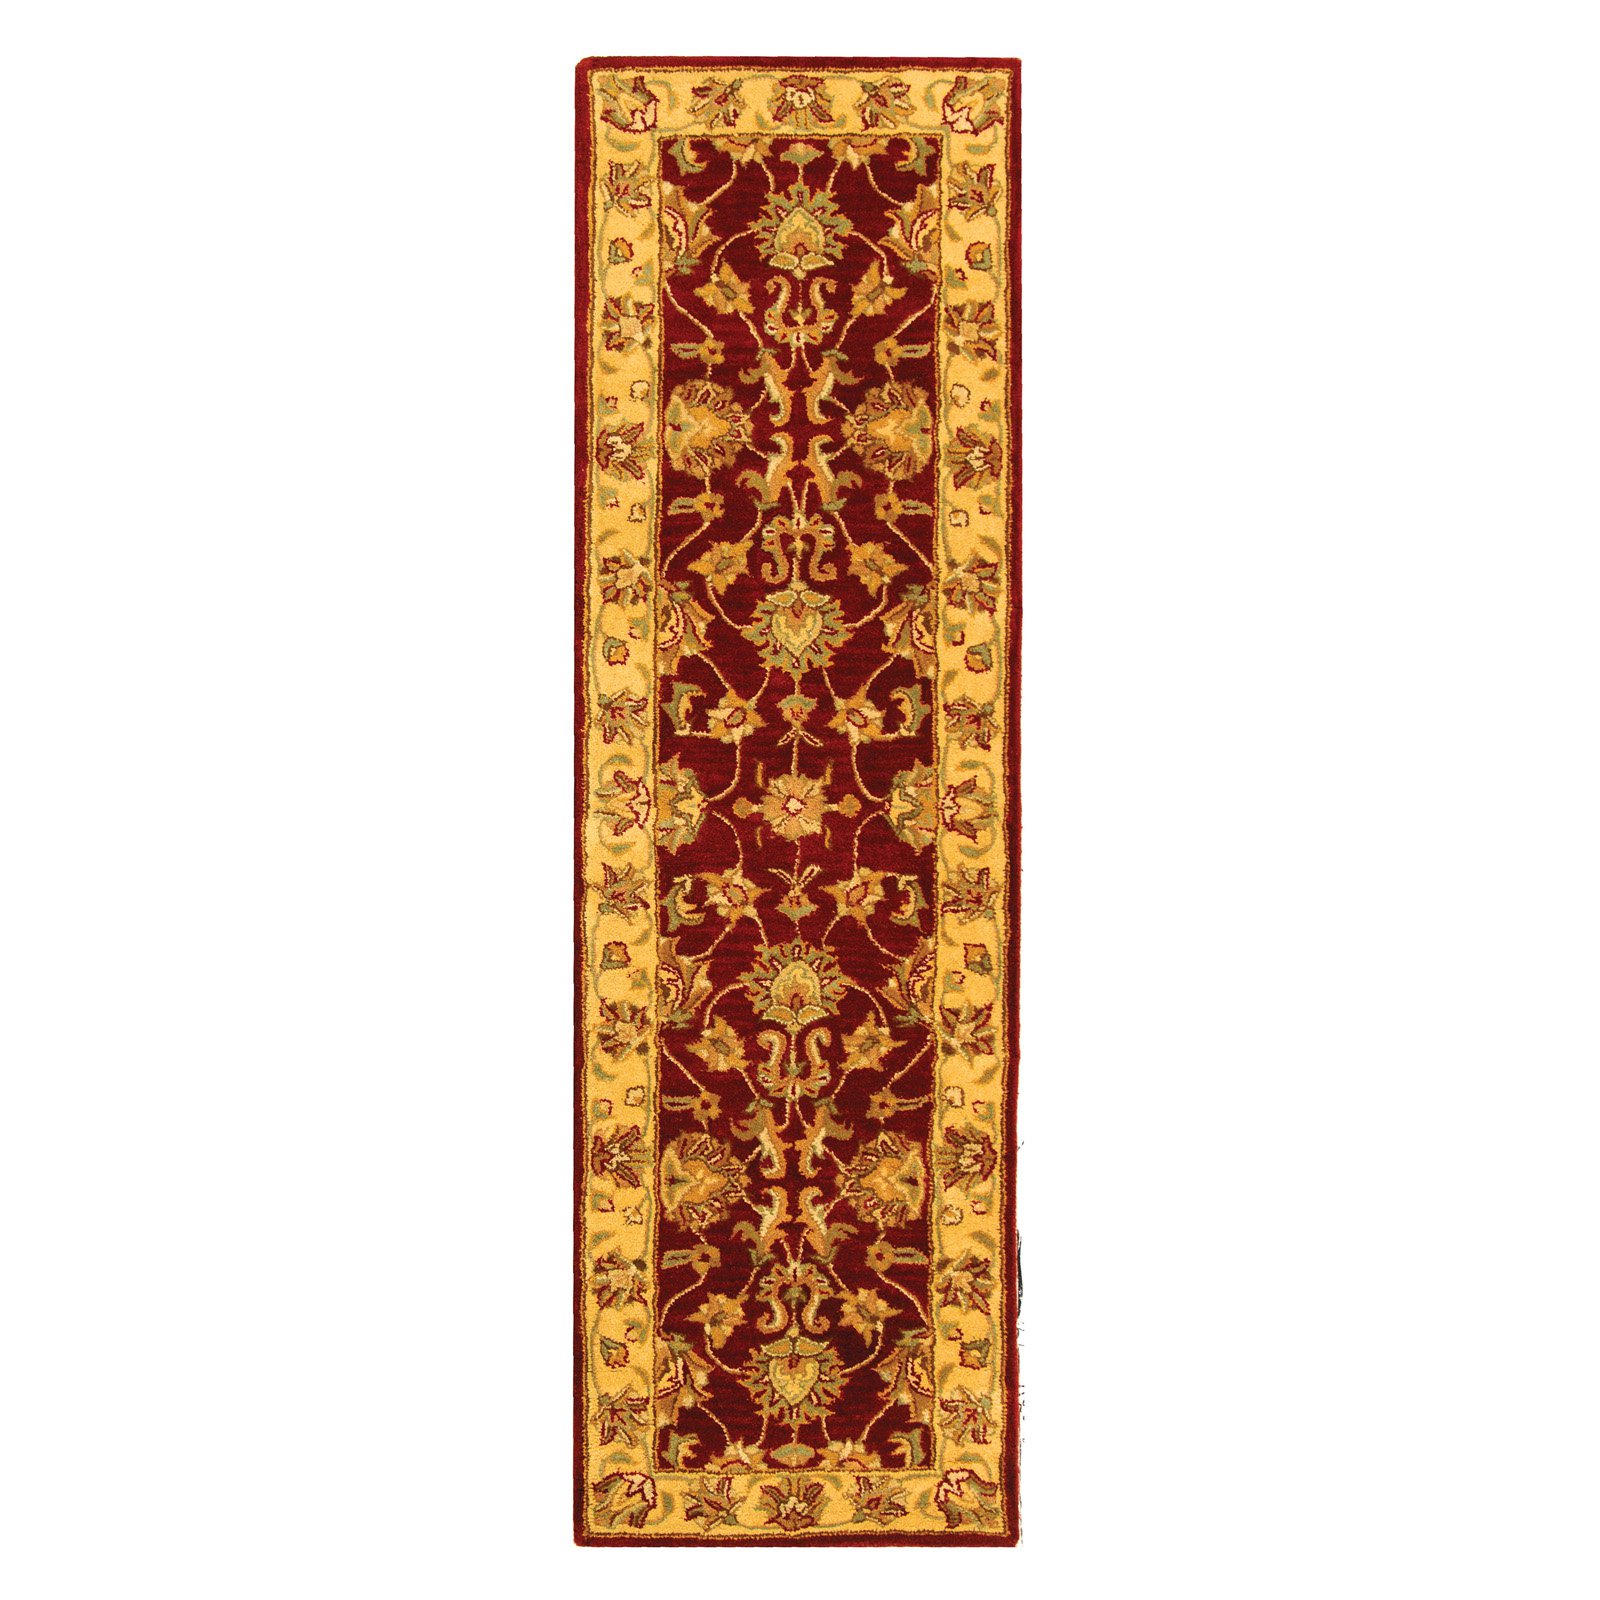 SAFAVIEH Heritage Regis Traditional Wool Area Rug, Red/Gold, 6' x 9' - image 3 of 9